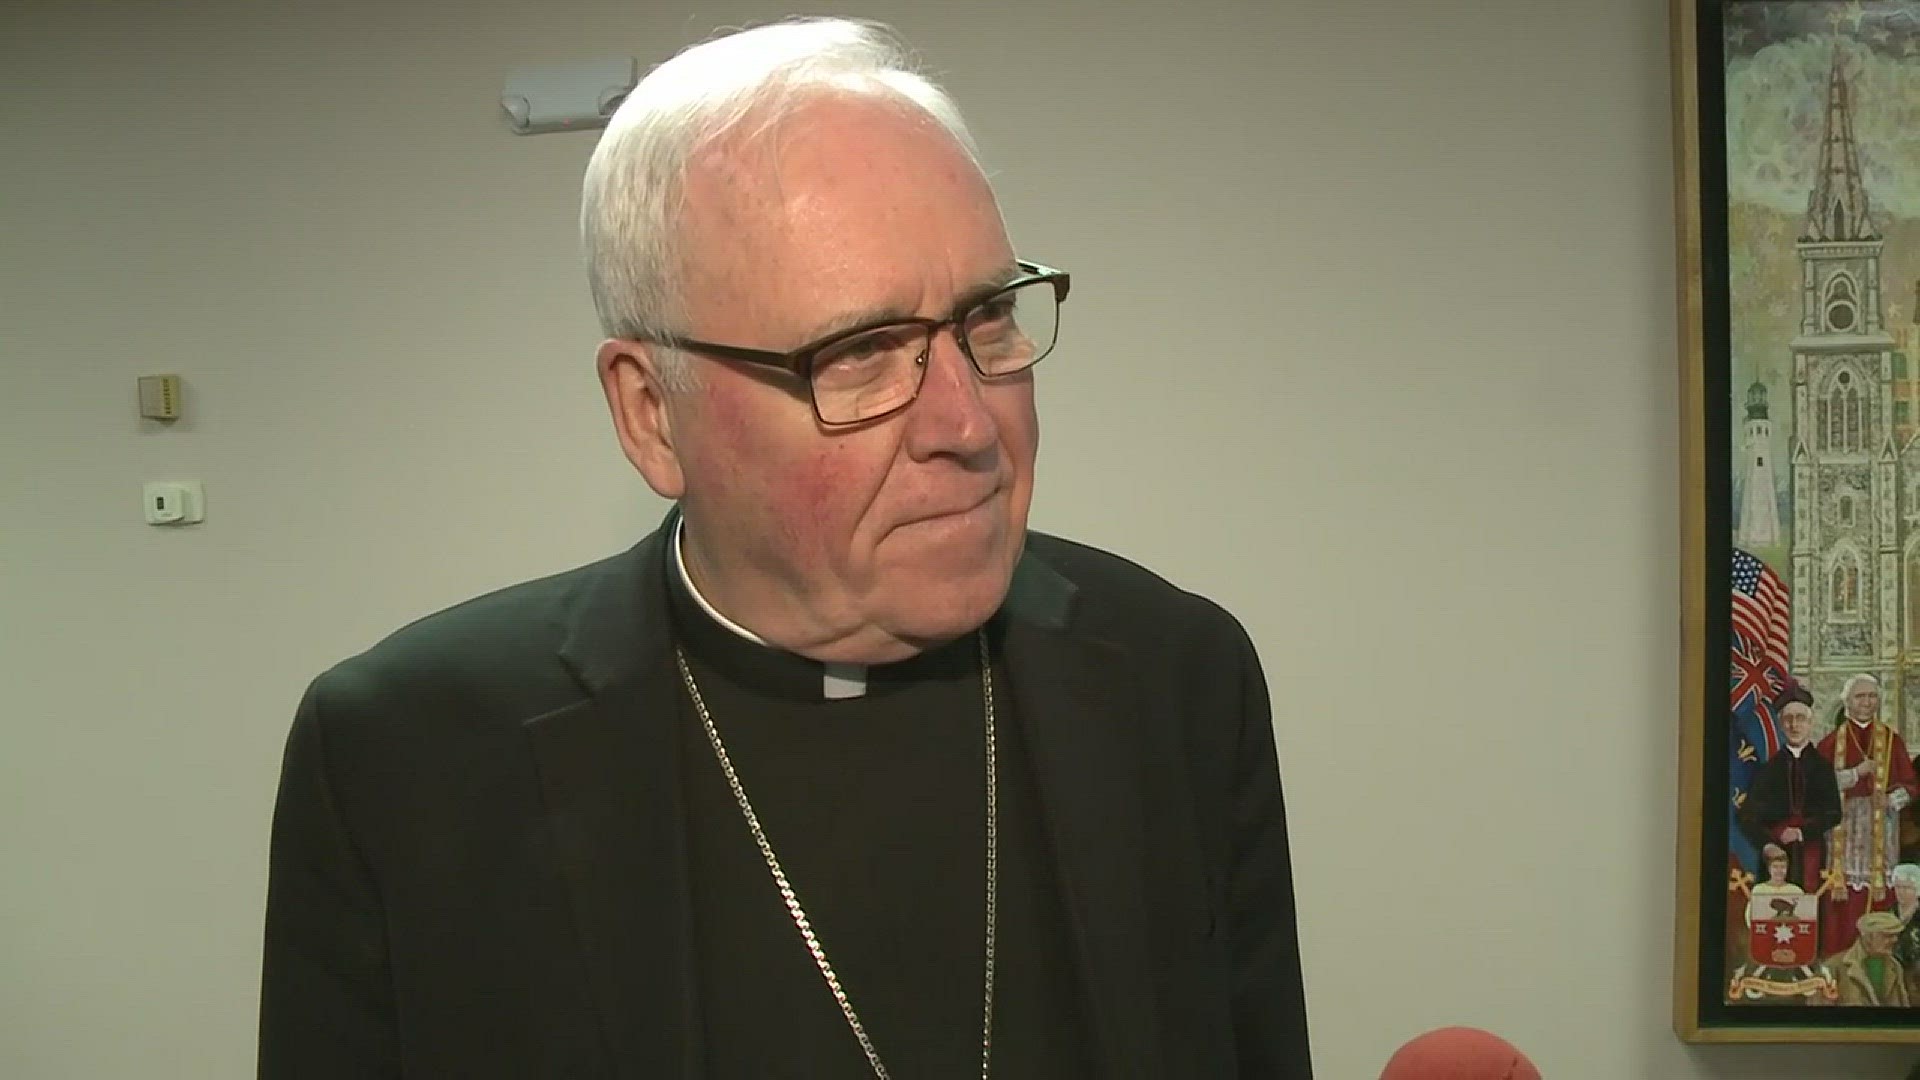 The Bishop of the Buffalo diocese spoke with Two On Your Side's Claudine Ewing